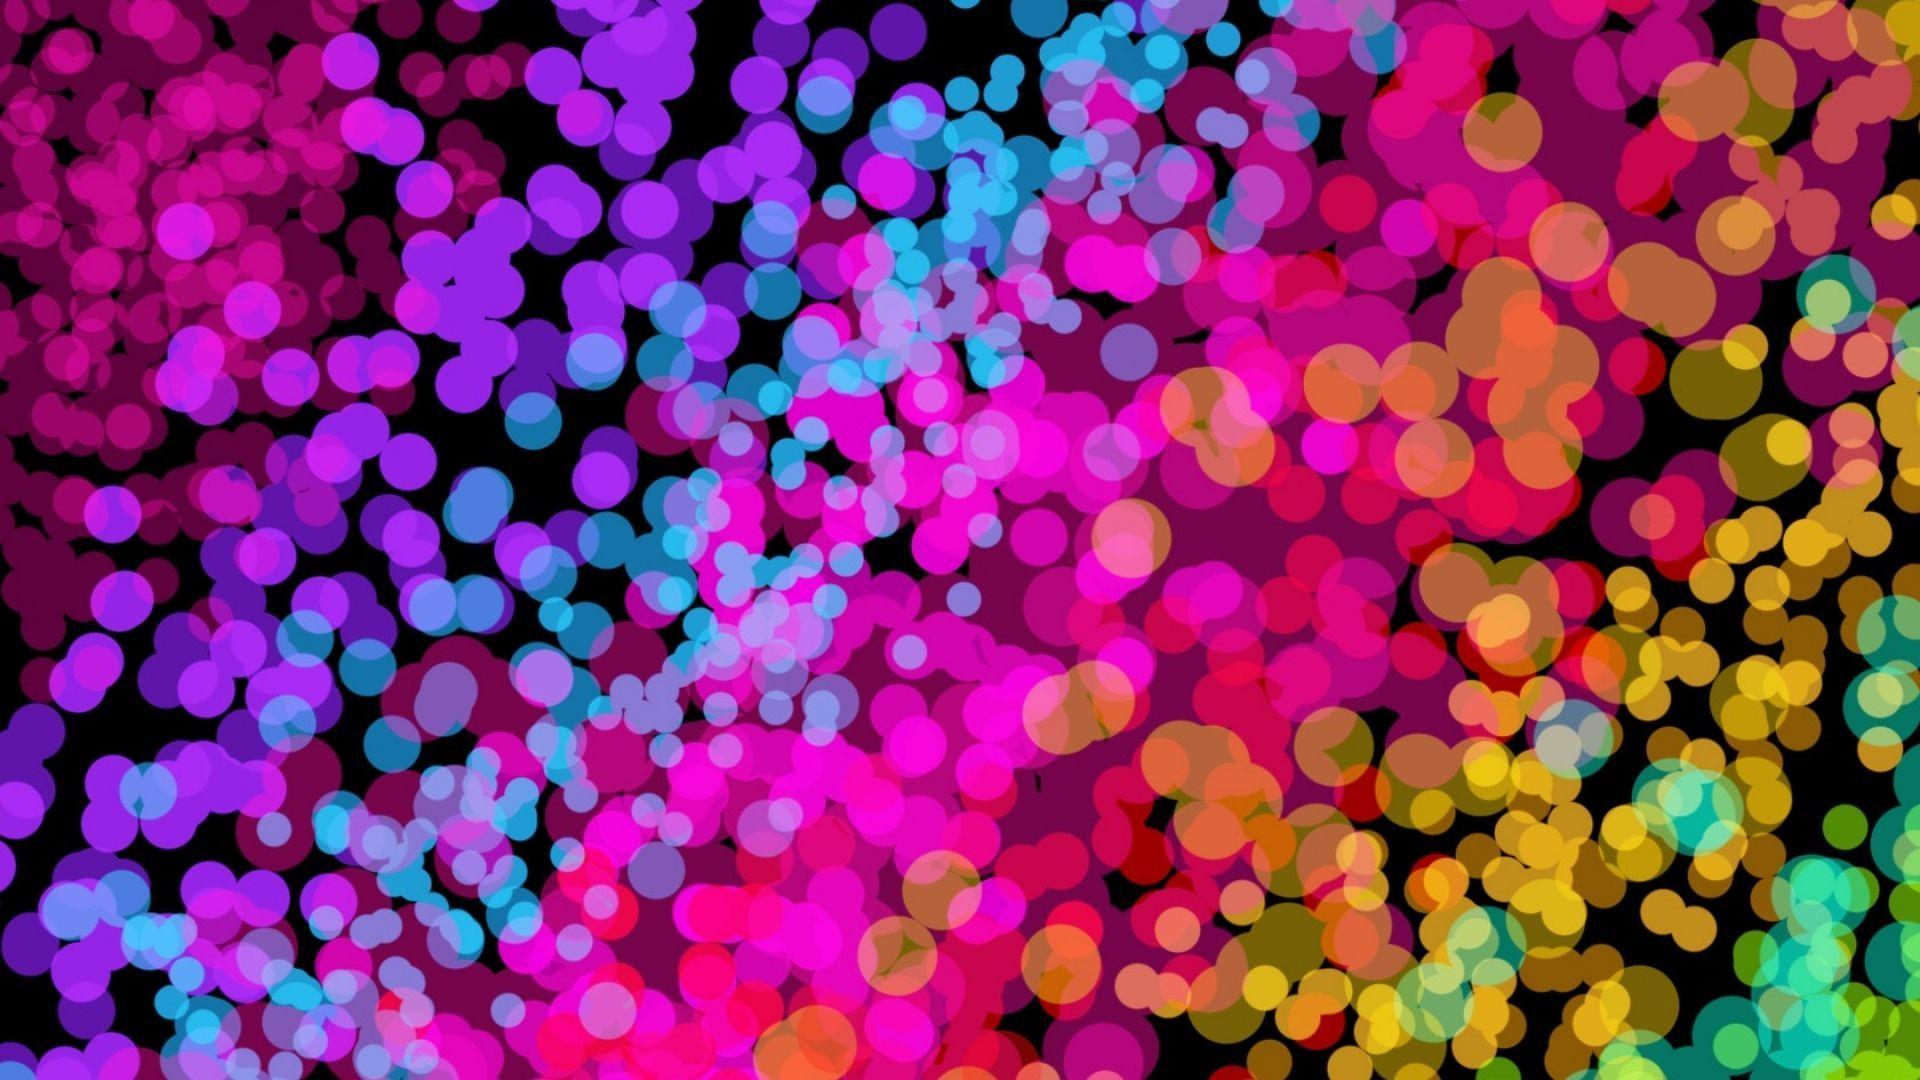 Bright Colors Background Picture. Wallpaper iphone neon, Pink glitter wallpaper, Bright wallpaper